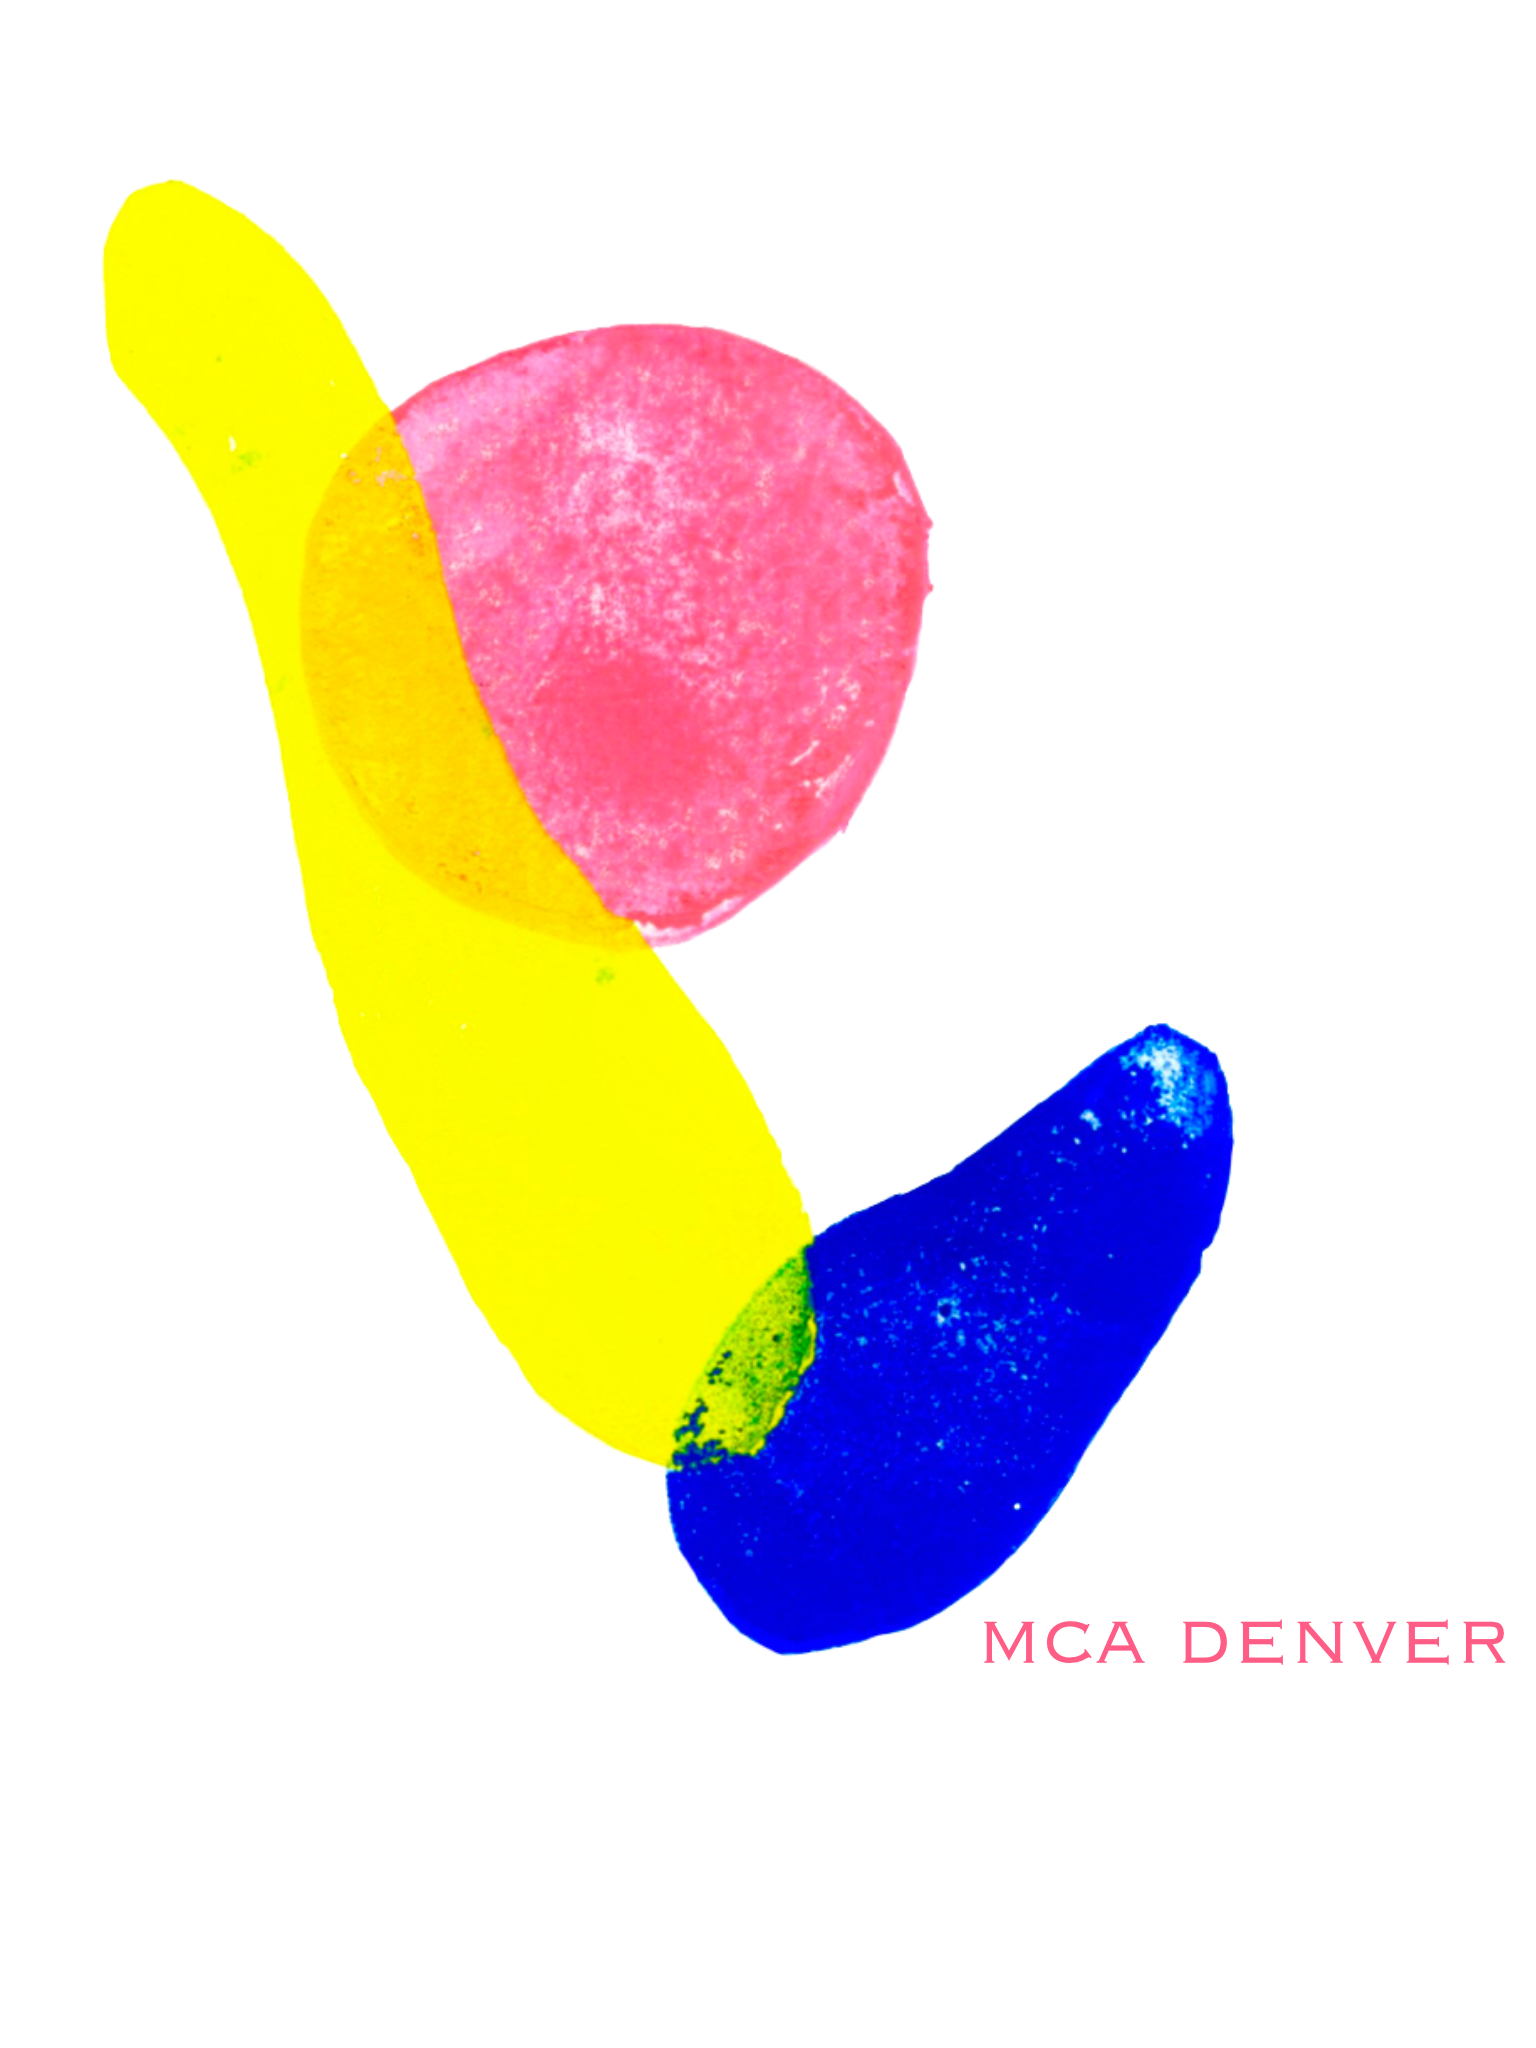 Three simple, abstract shapes in the colors blue, yellow and pink, which overlap one another. The text “MCA Denver” is at the bottom right hand corner of the design. 